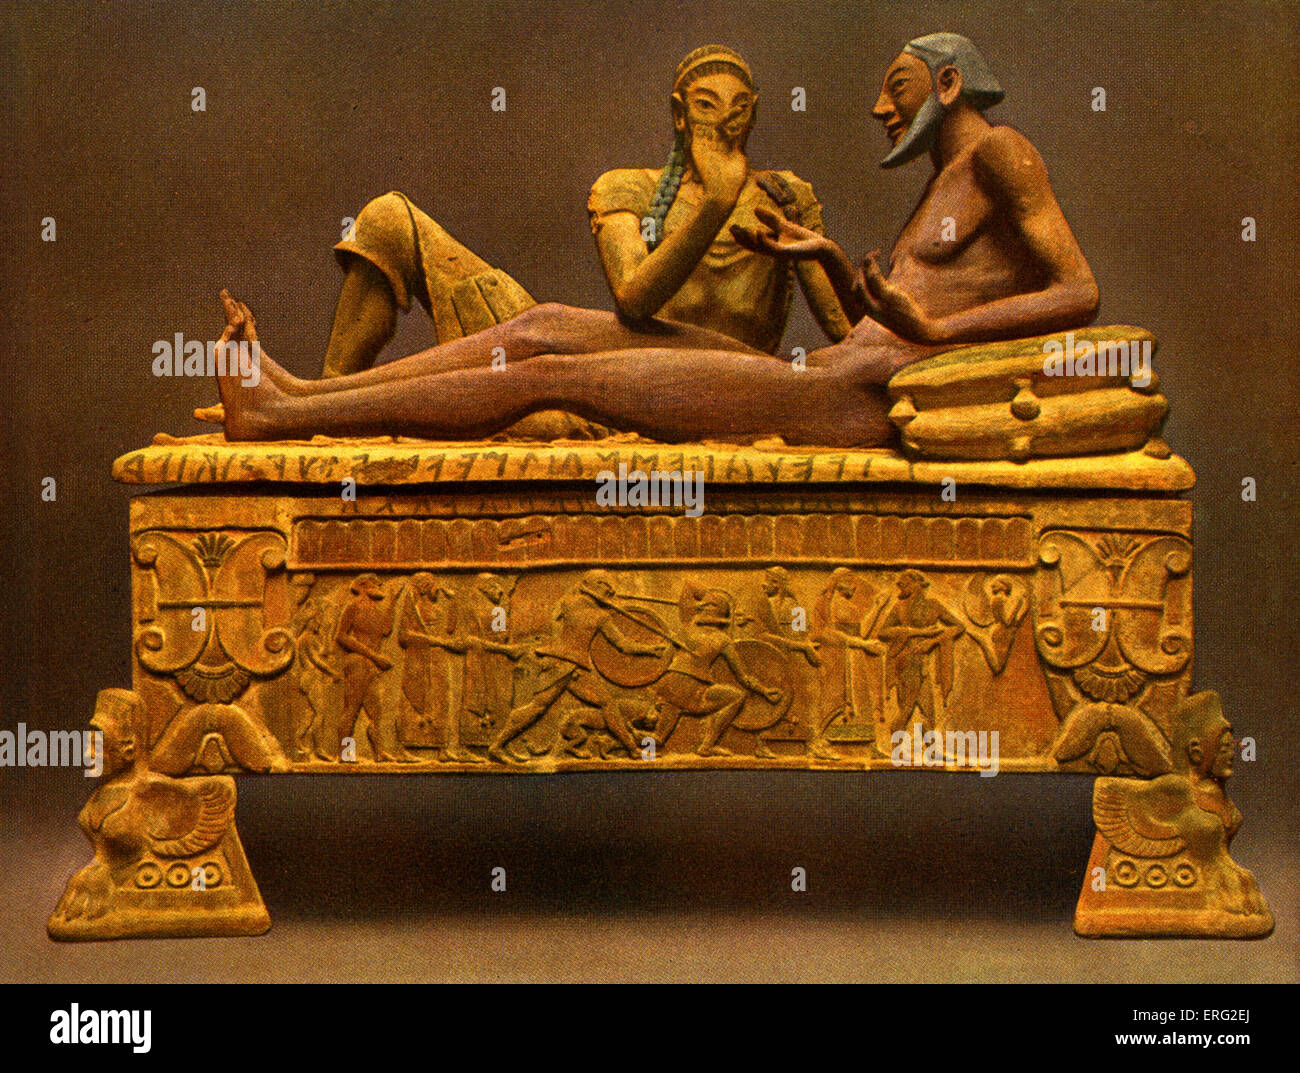 Painted Etruscan sarcophagus, showing a reclining man in conversation with winged beast feet and a military scene.  Found at Stock Photo